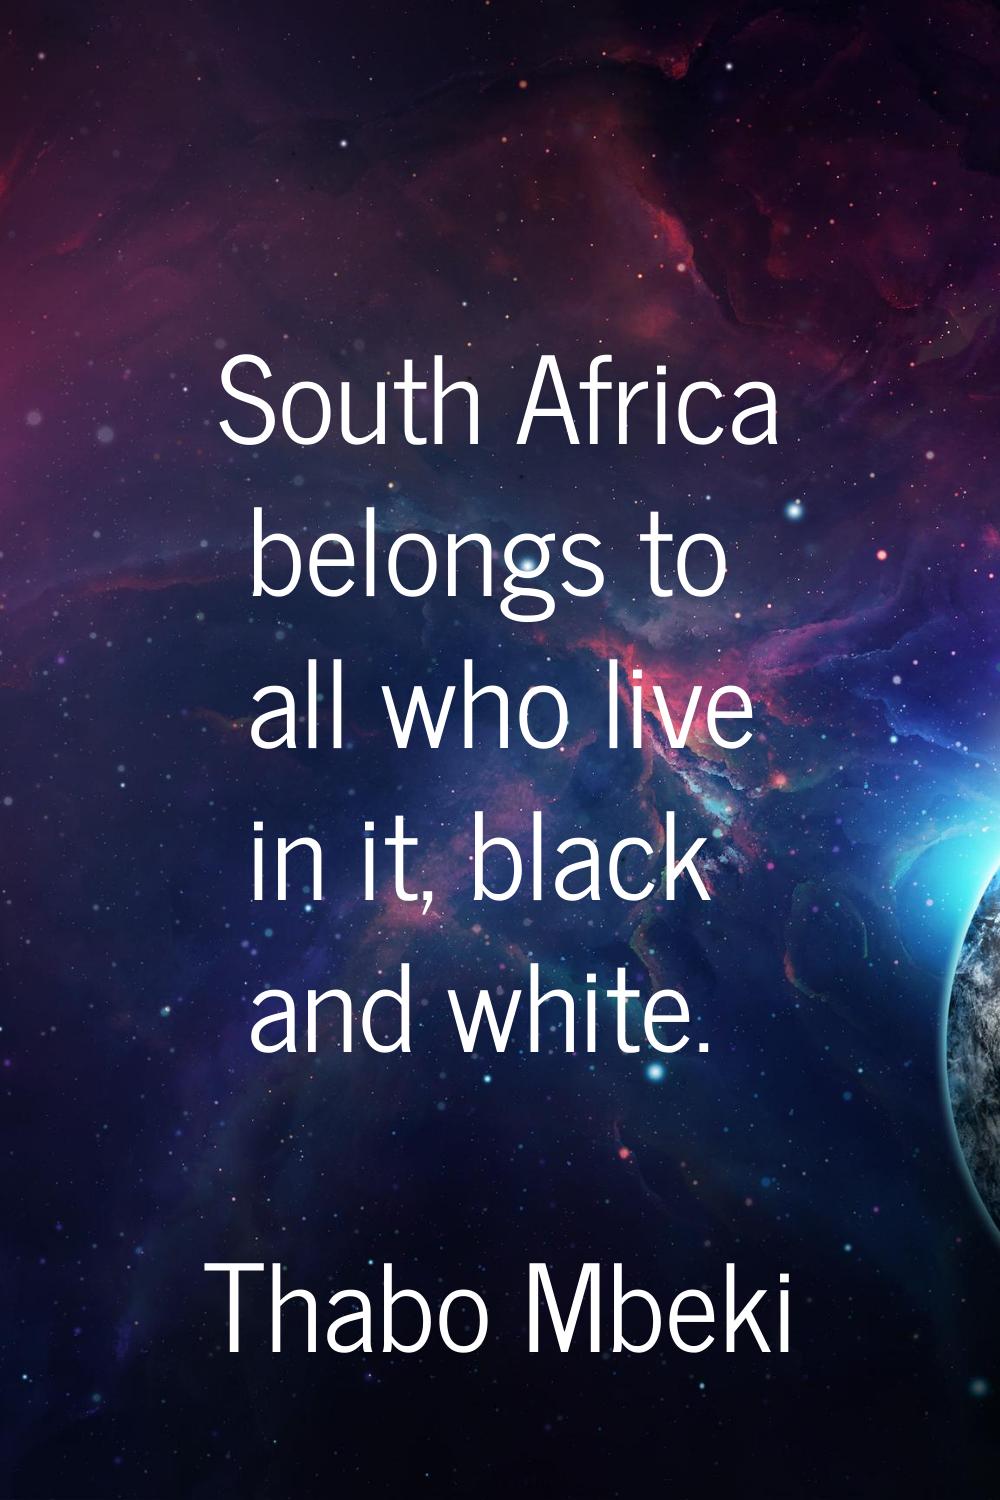 South Africa belongs to all who live in it, black and white.